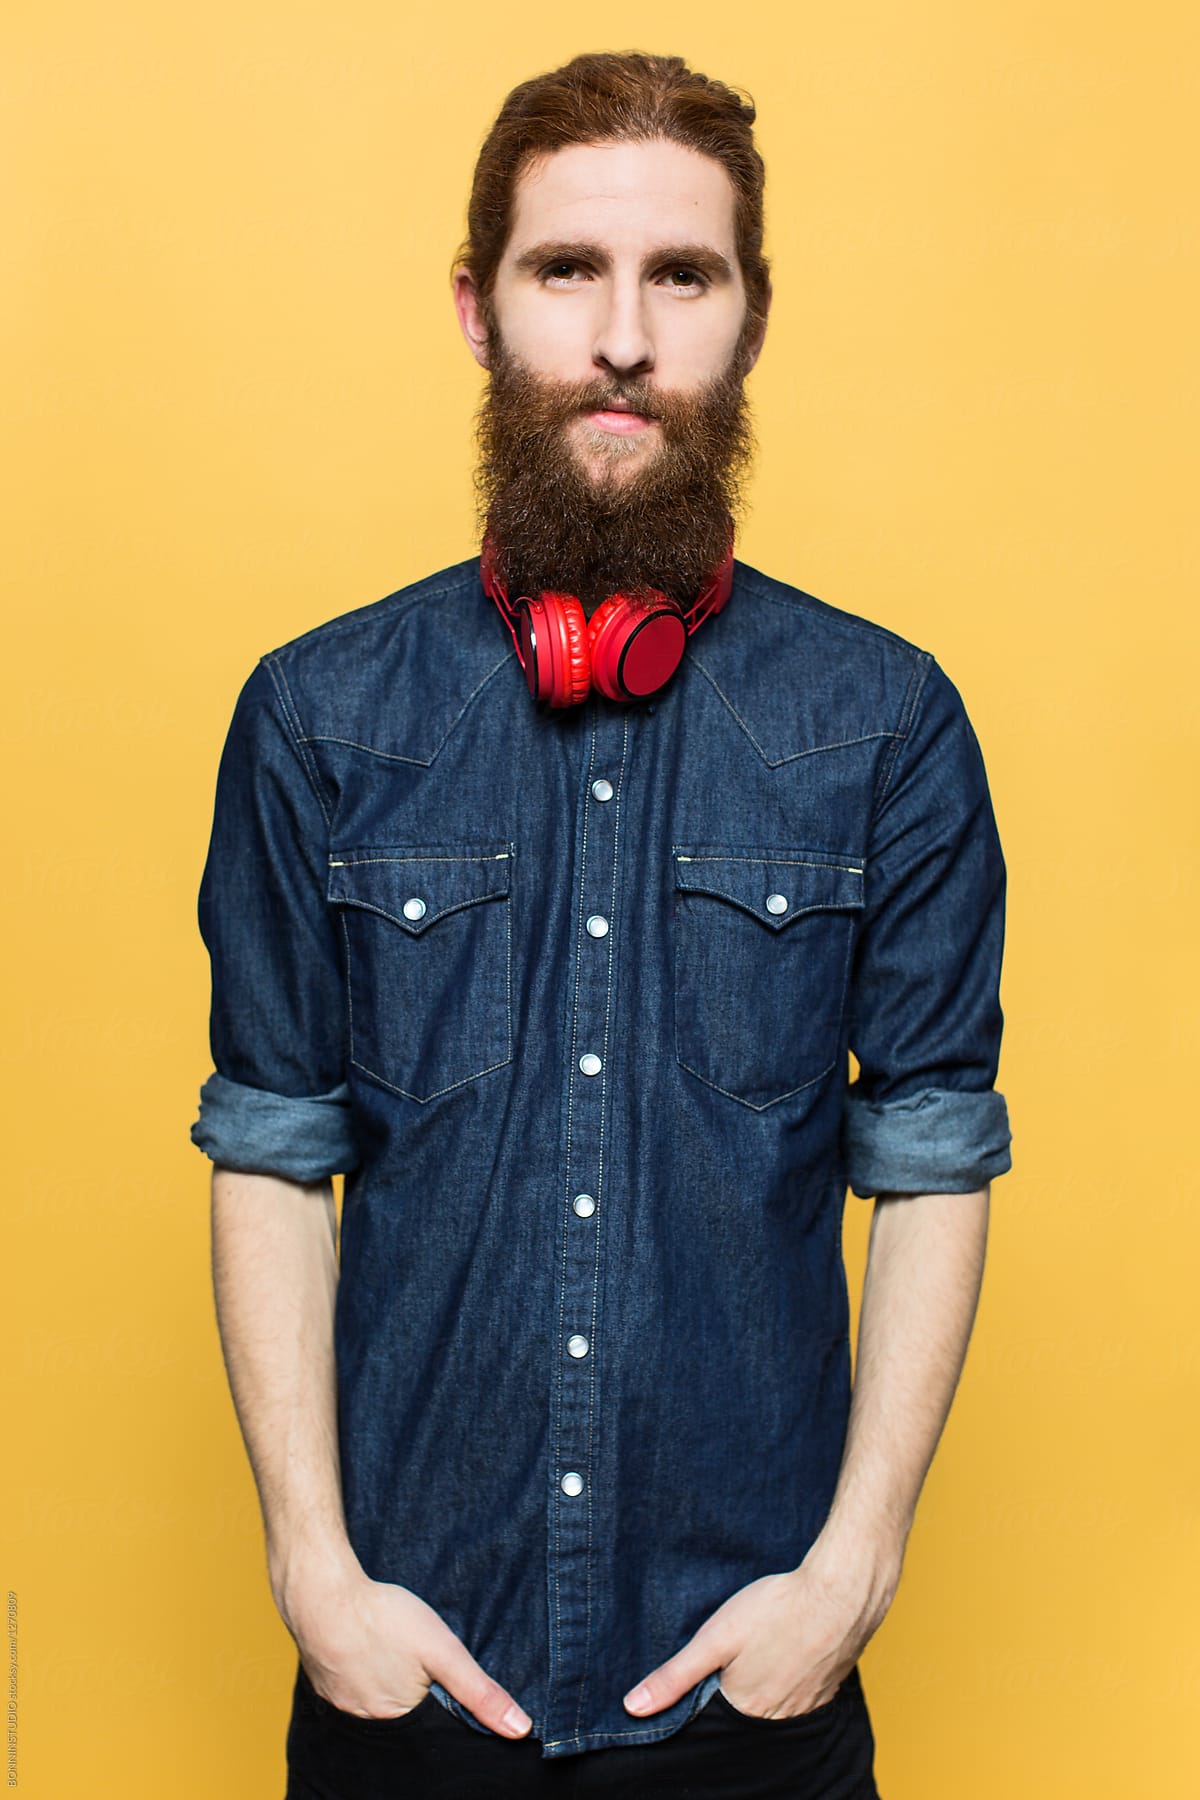 Portrait of a bearded man wearing red headphones in front a yellow wall.